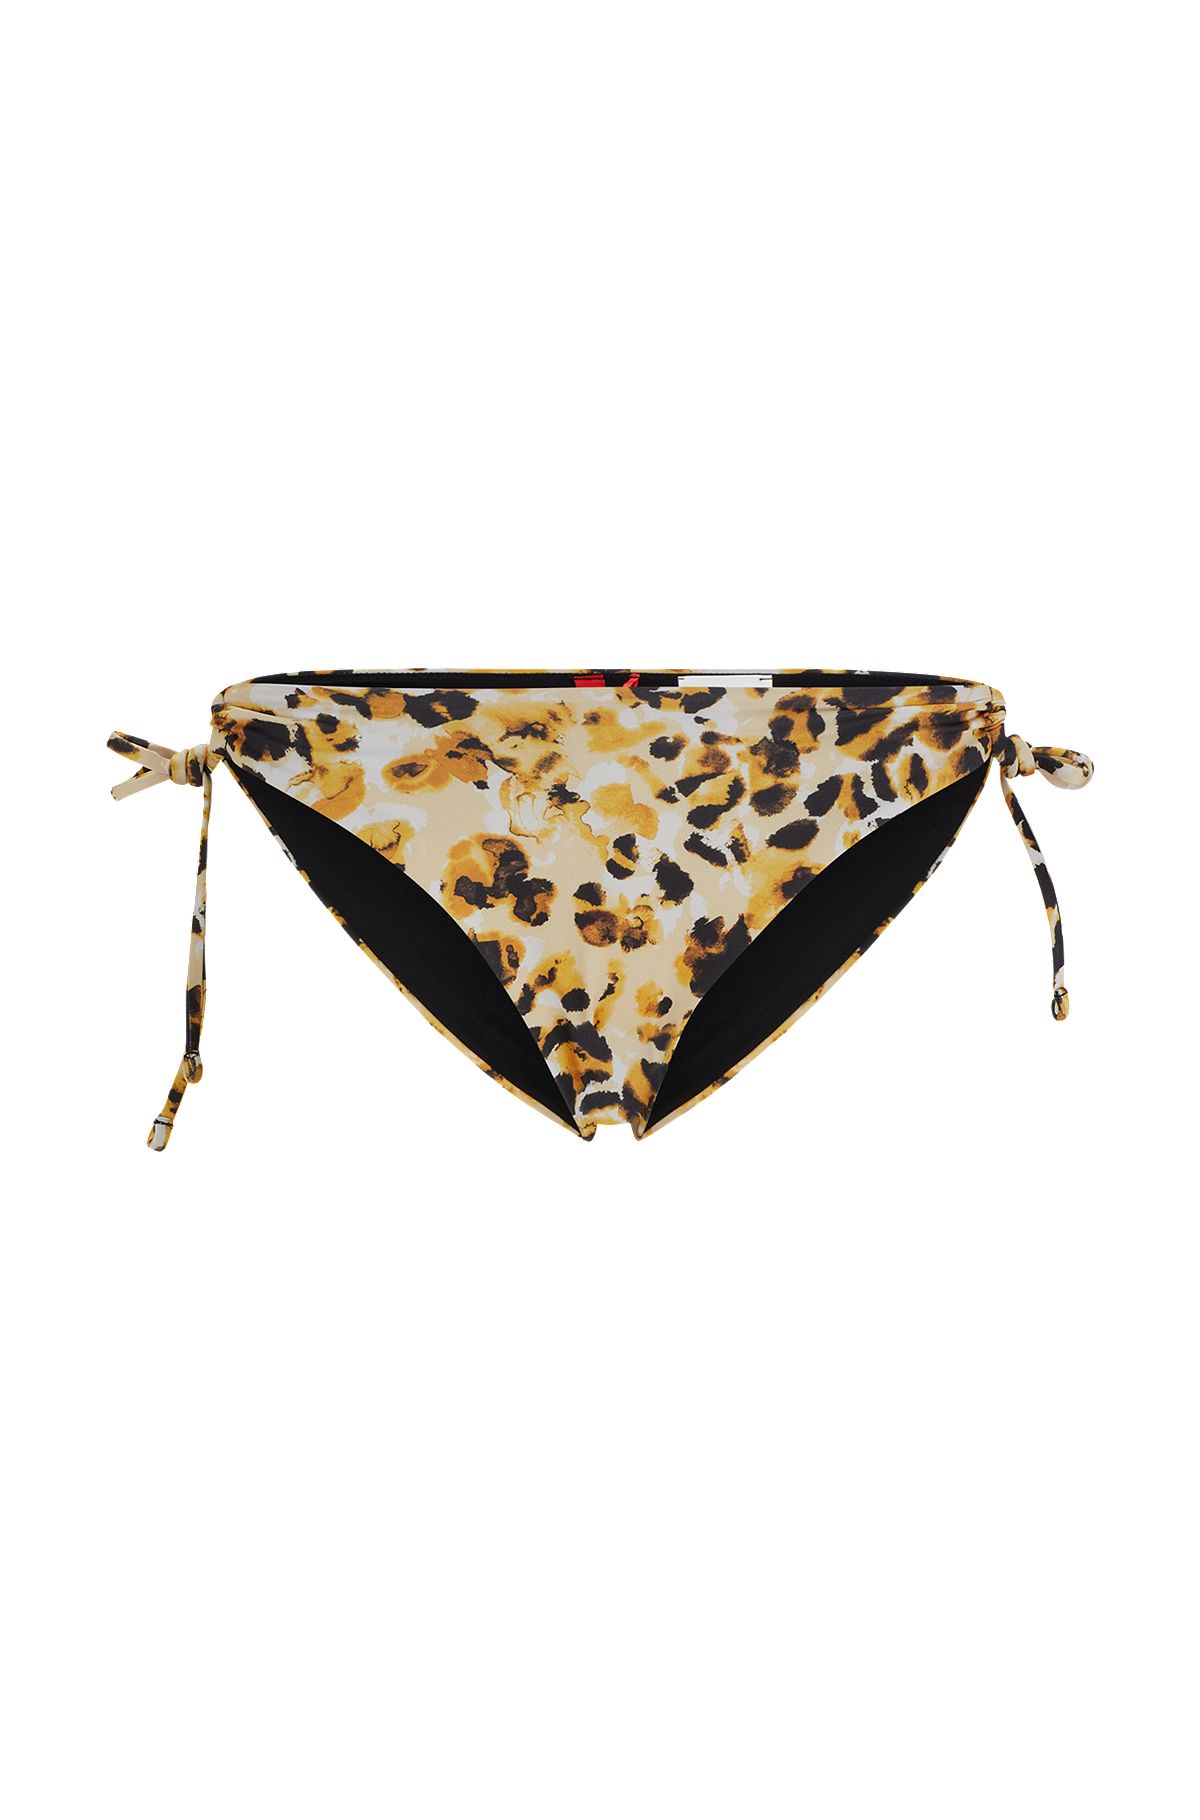 Tie-side bikini bottoms with camouflage print, Patterned